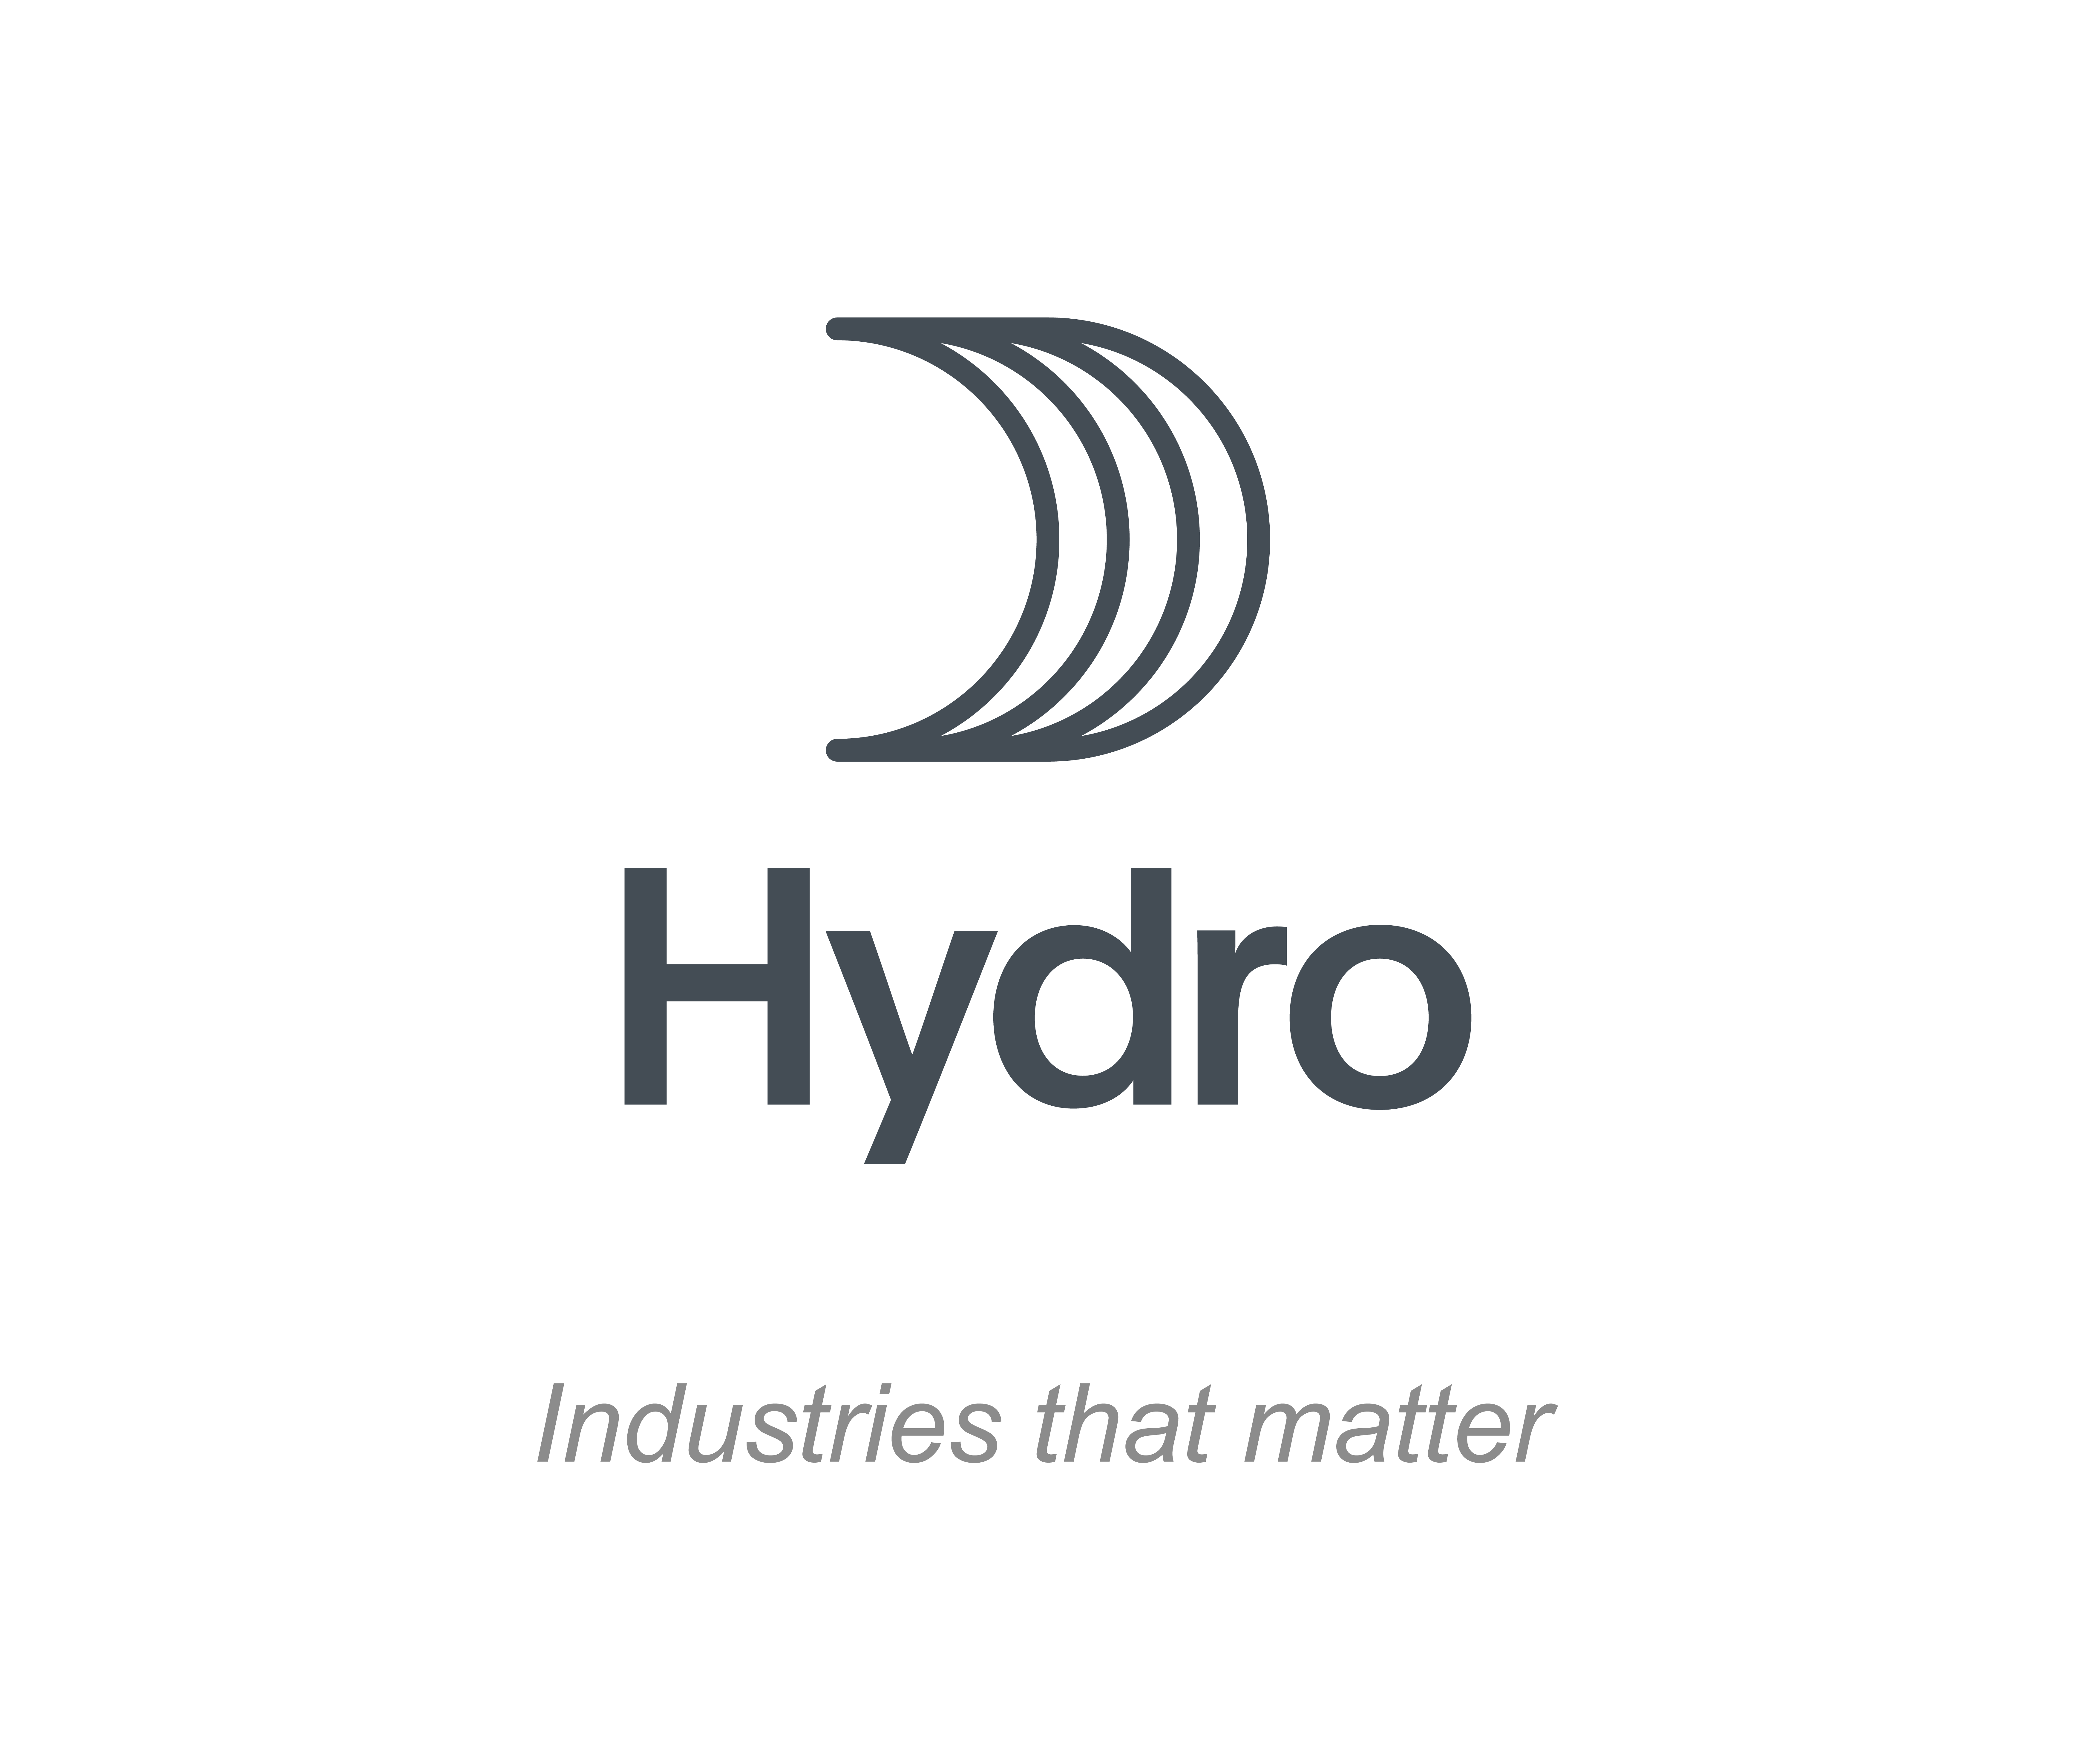 Hydro is looking for a Senior Enterprise Architect, Application Architecture and Security